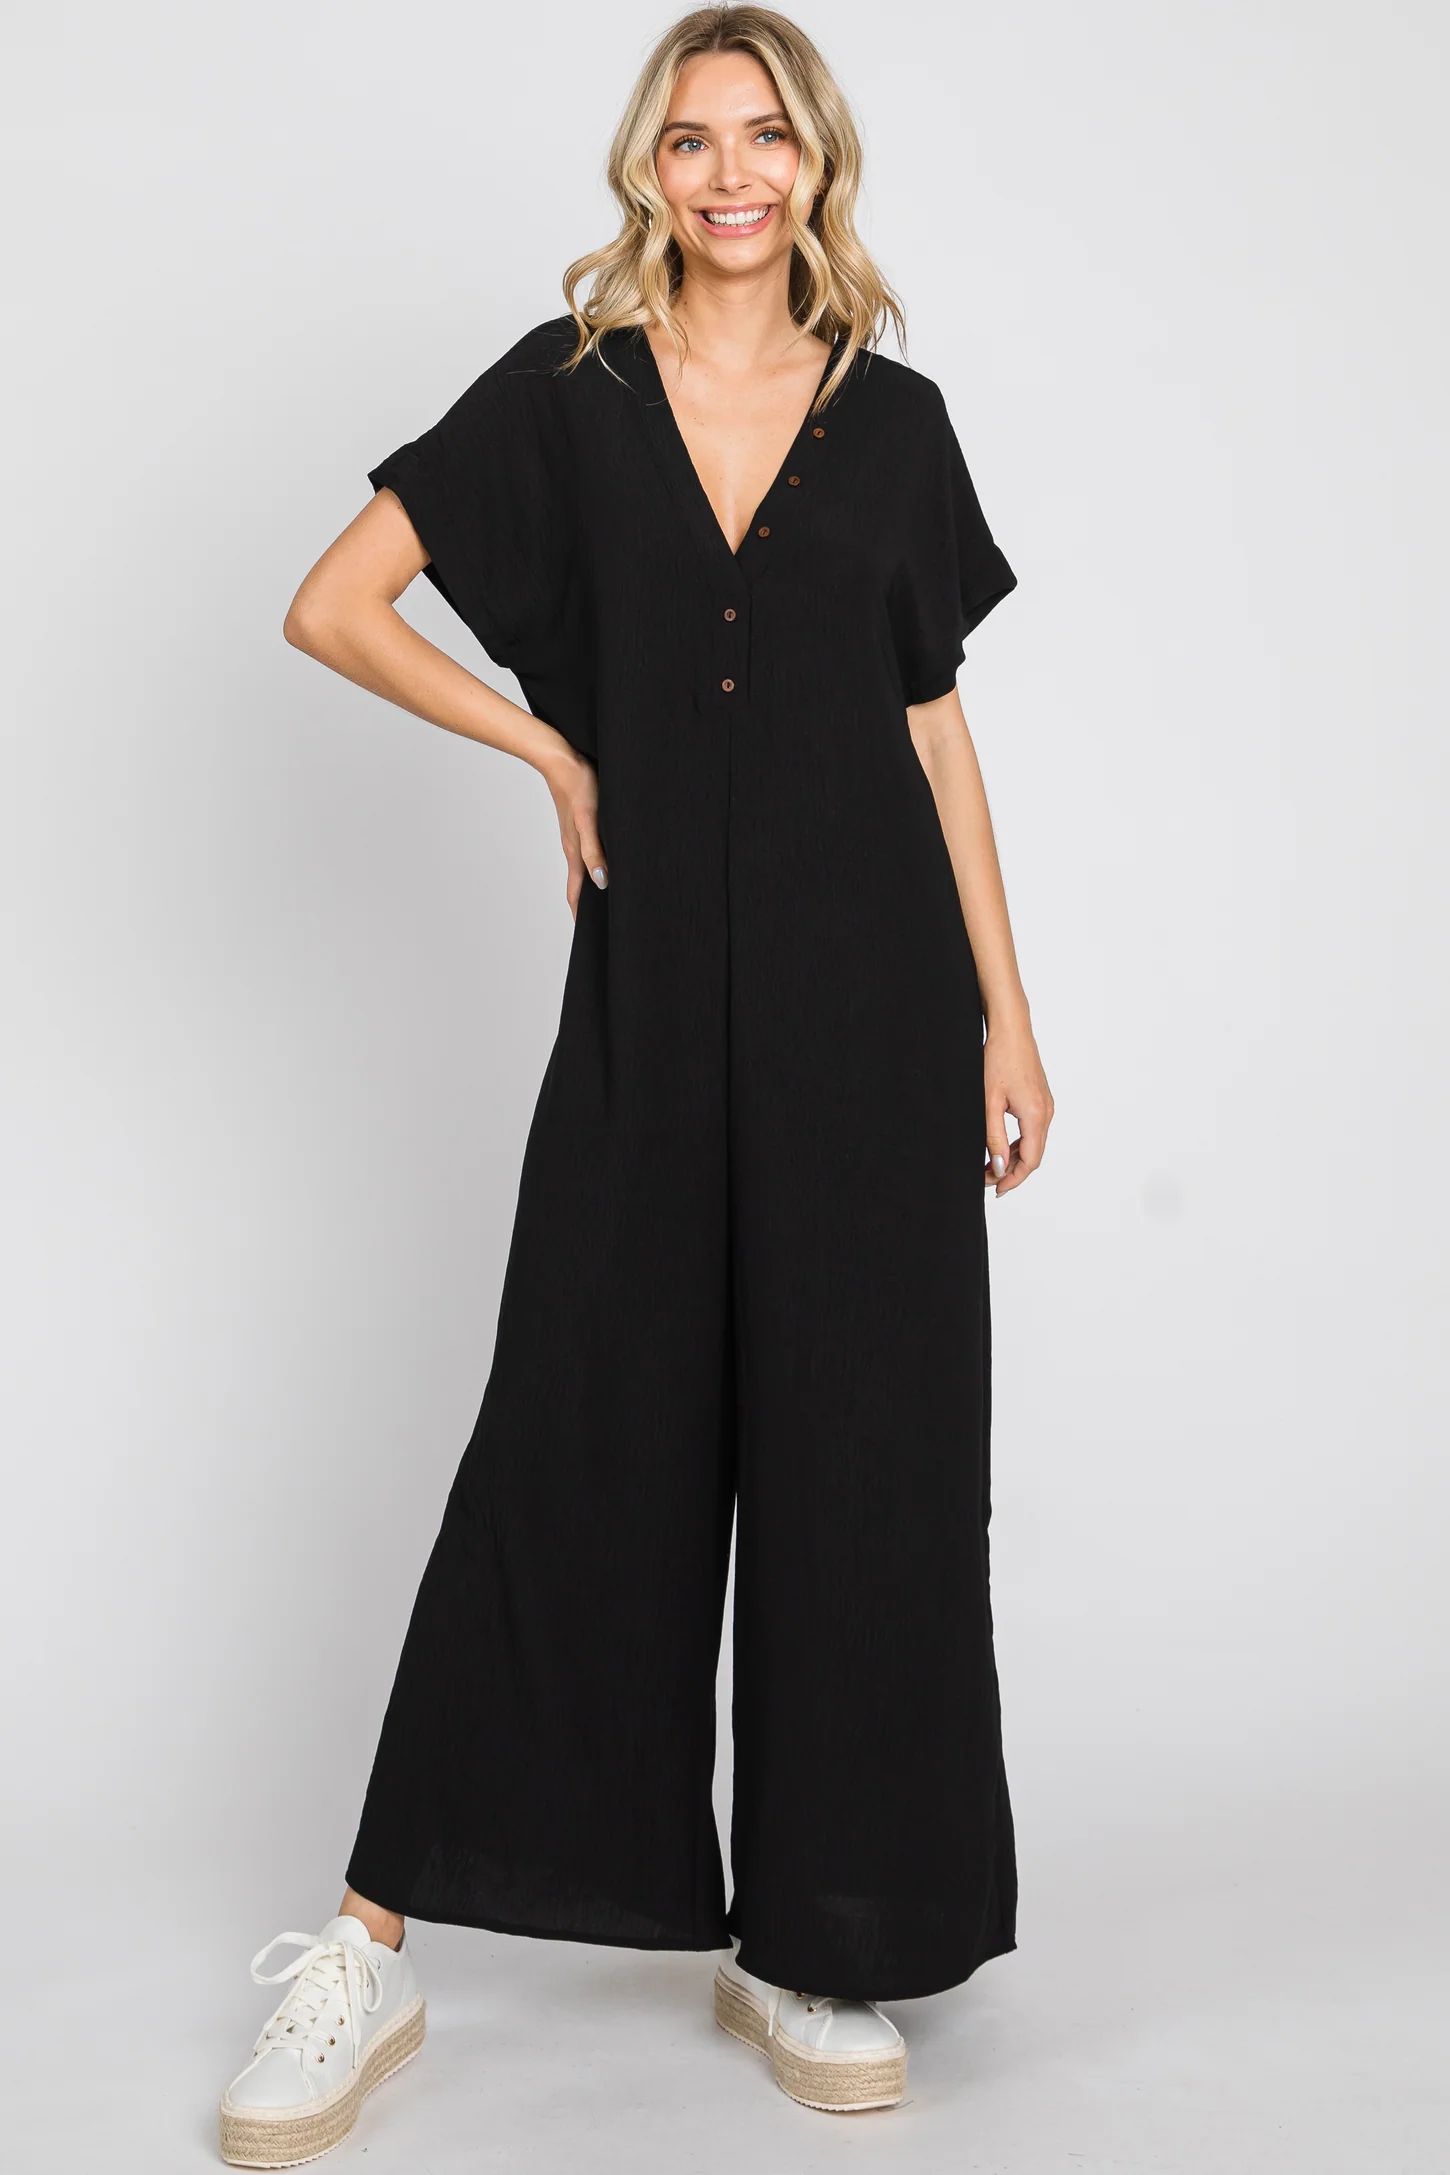 Black Front Button Accent Jumpsuit | PinkBlush Maternity